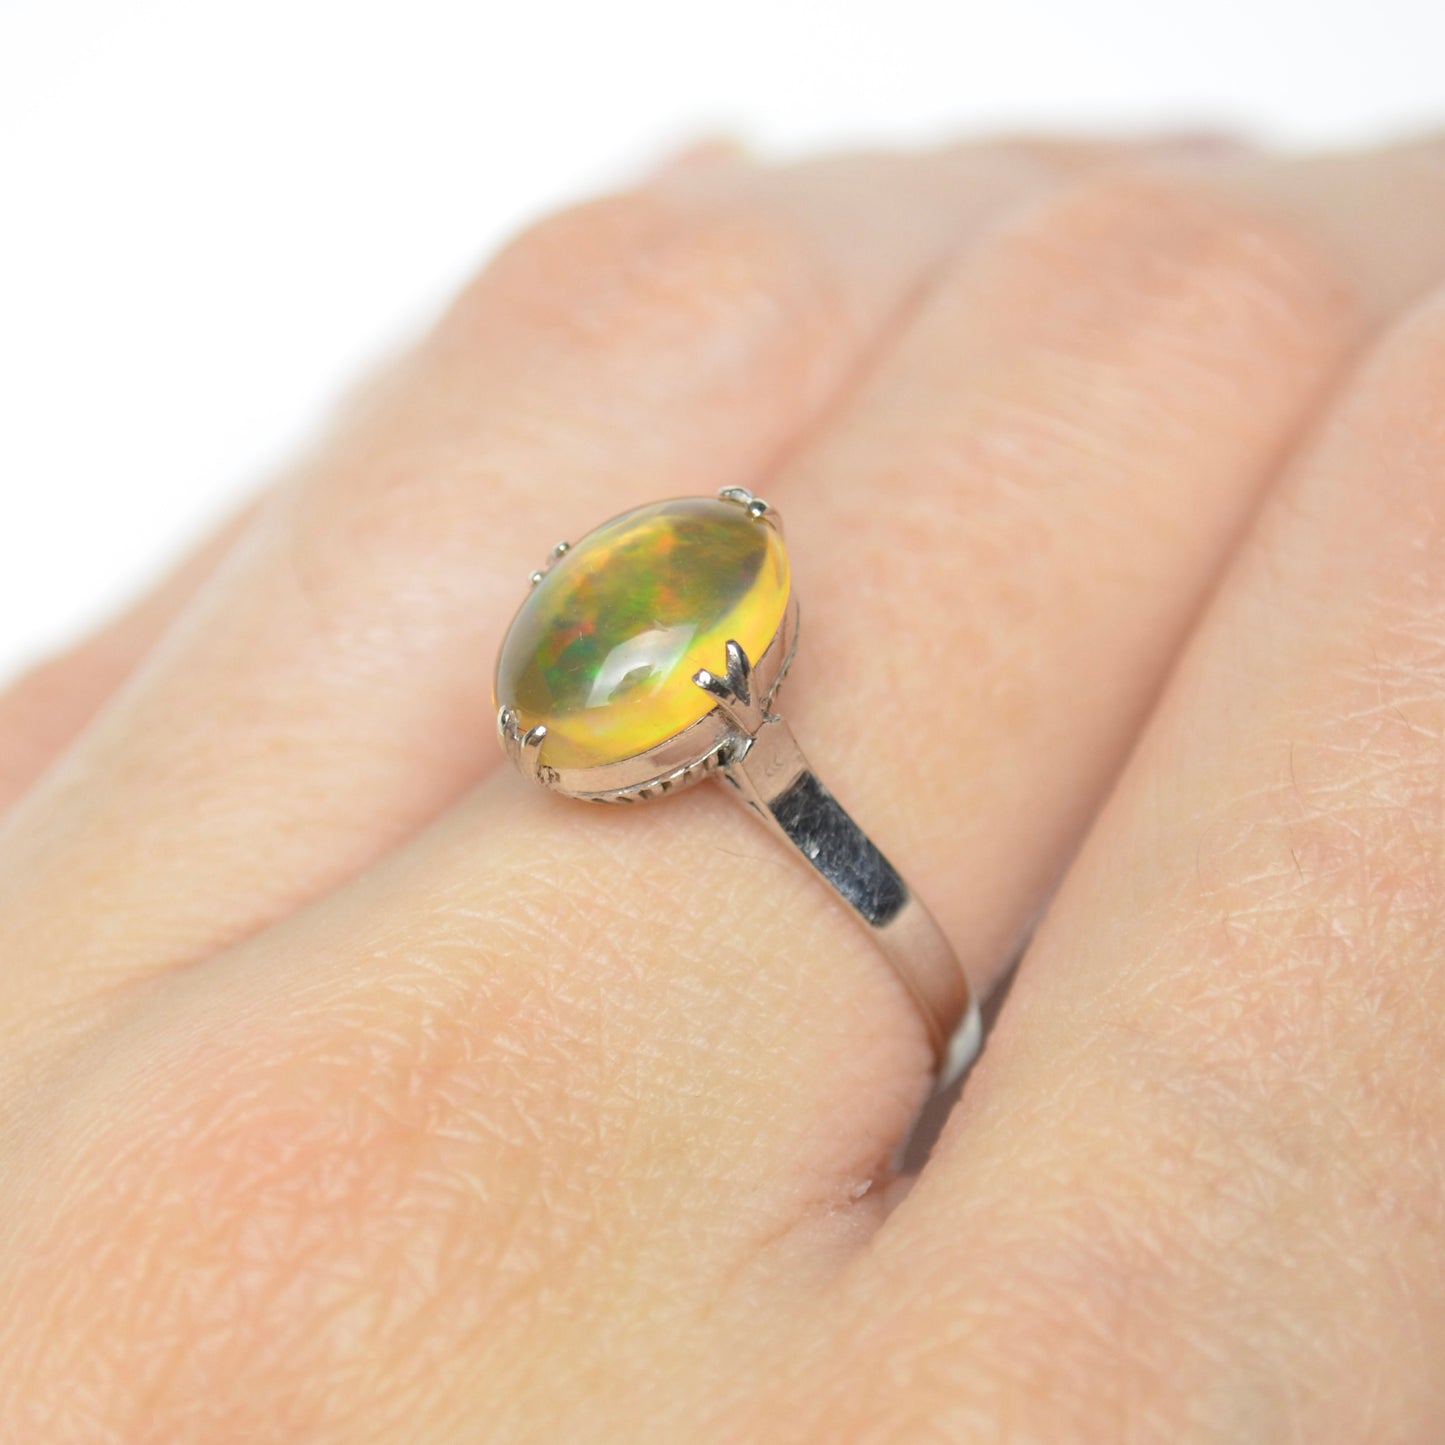 Antique Opal and Gold Ring